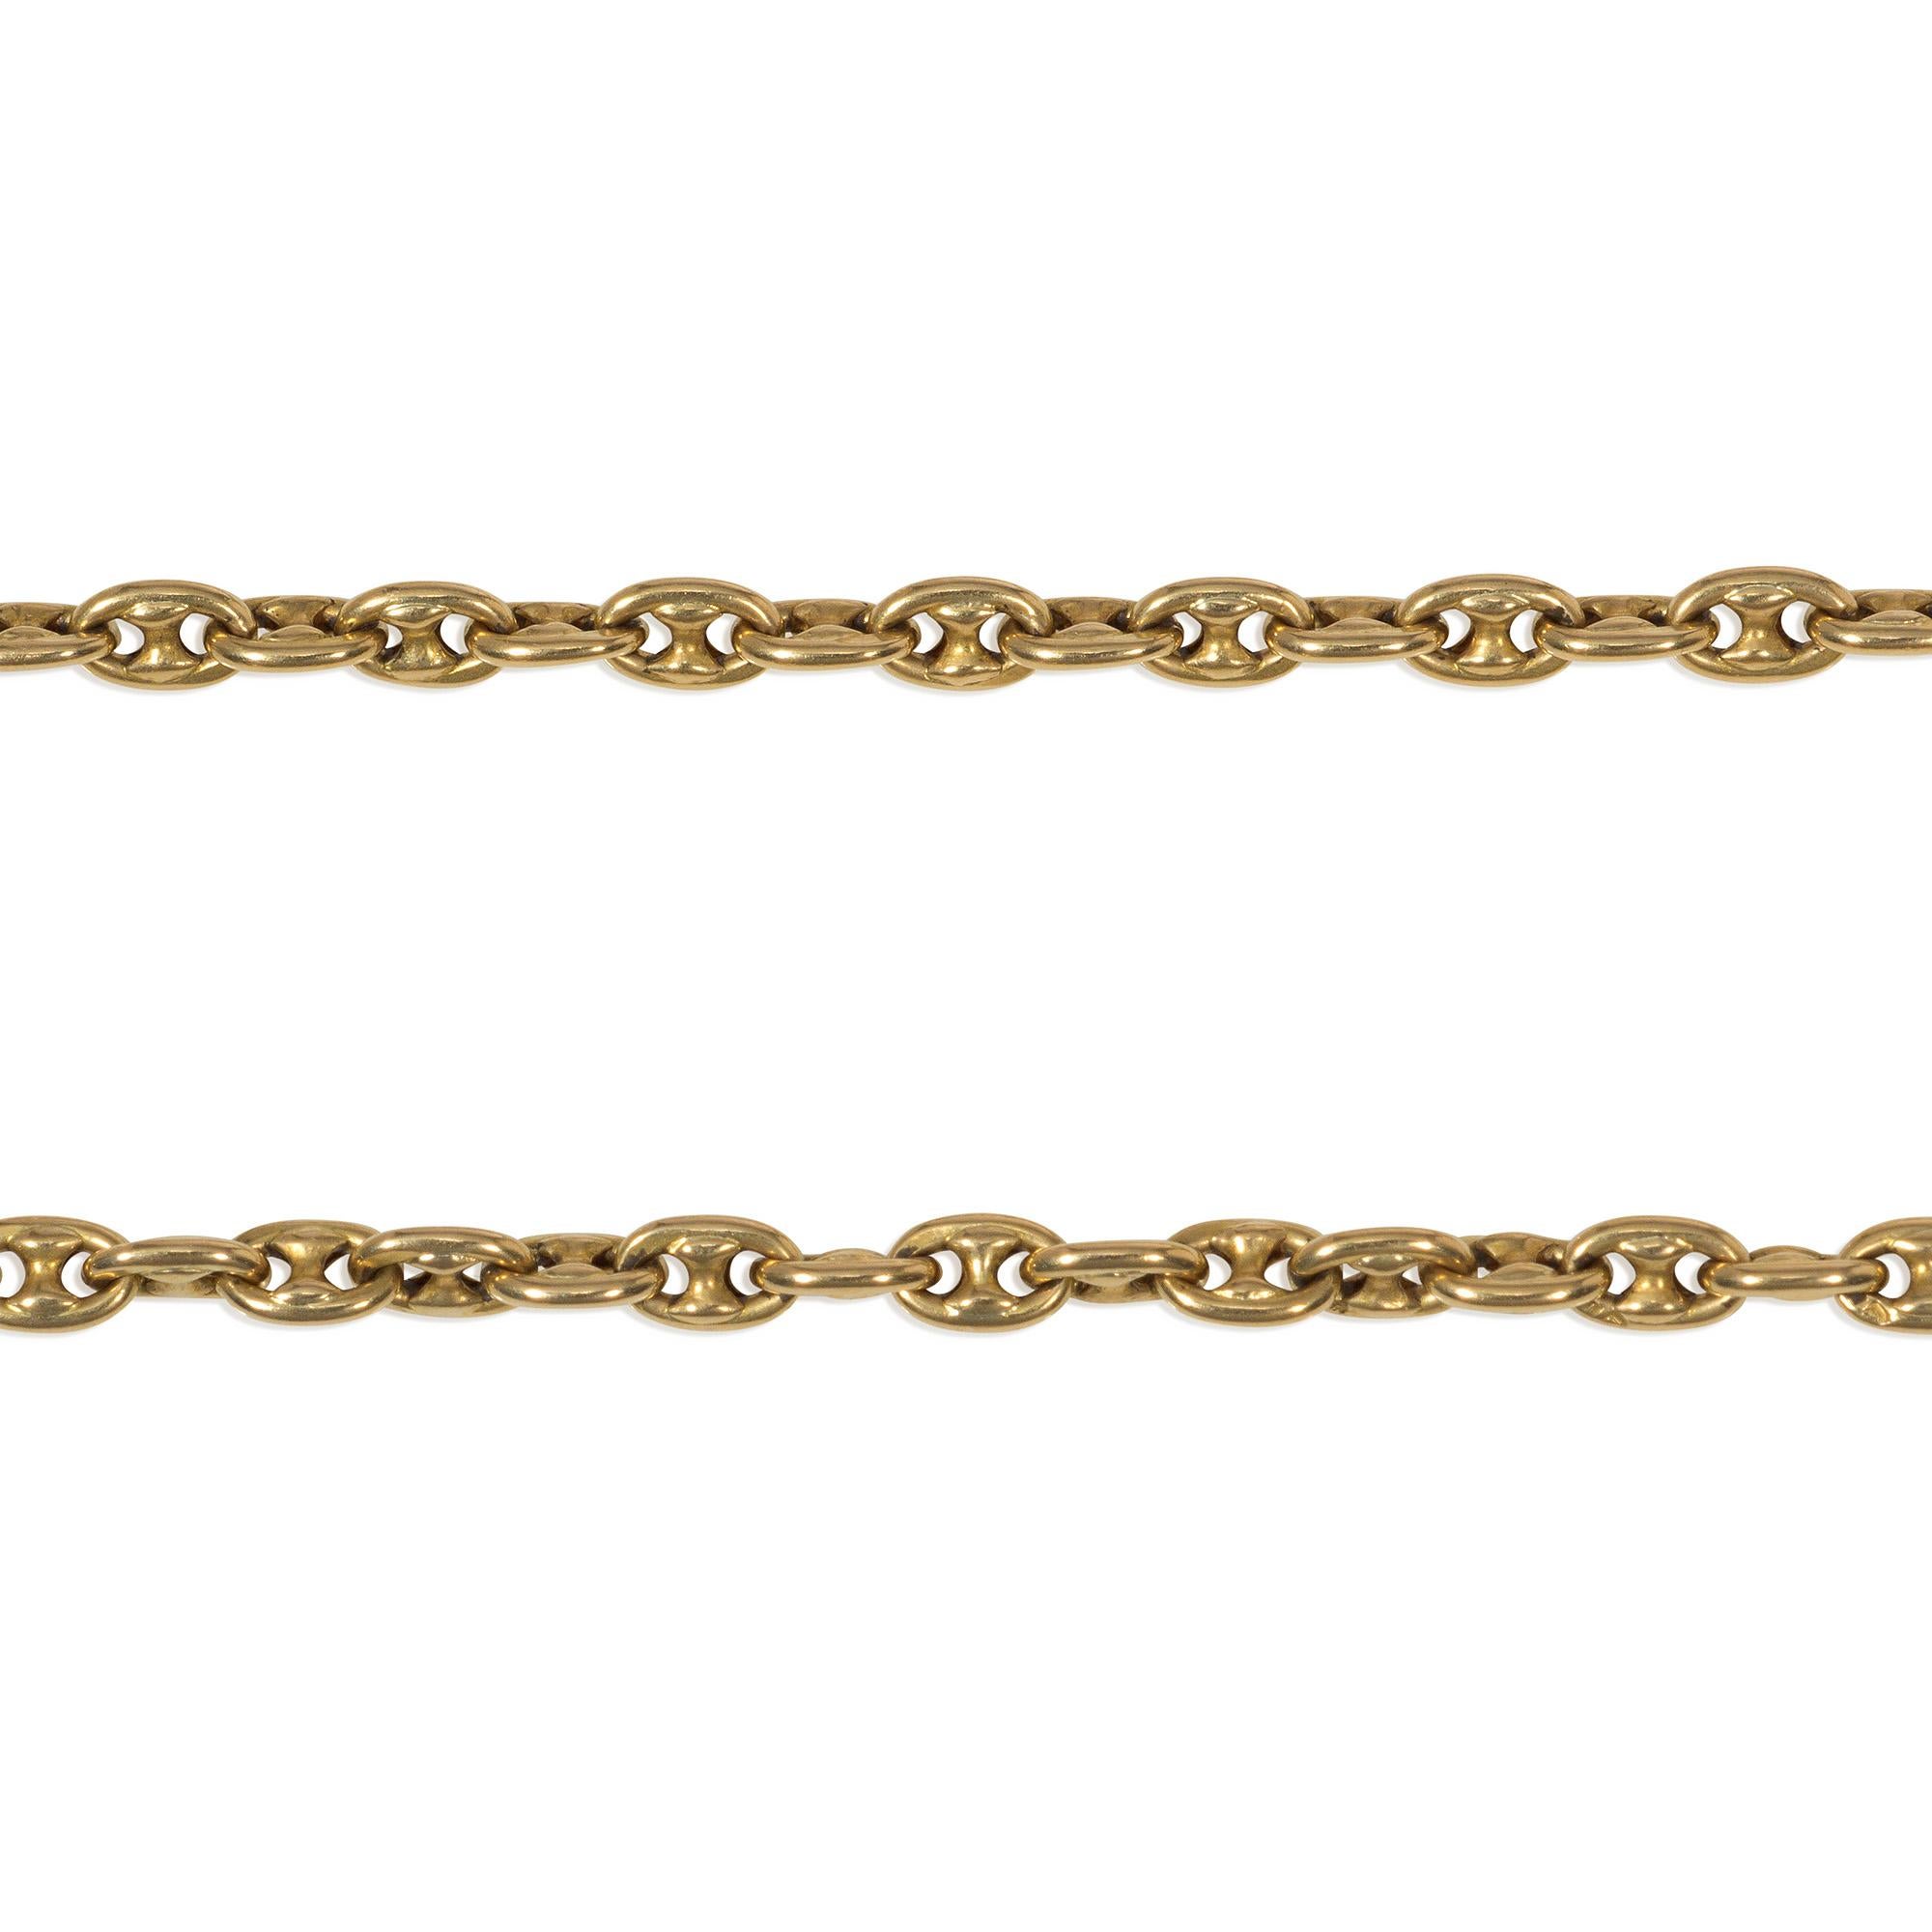 An antique Victorian period gold long necklace of anchor chain links, completed by a hinged clasp enabling chain to be worn at multiple lengths, in 18k.  England

* Includes letter of authenticity
* Free shipping

Please do not hesitate to request